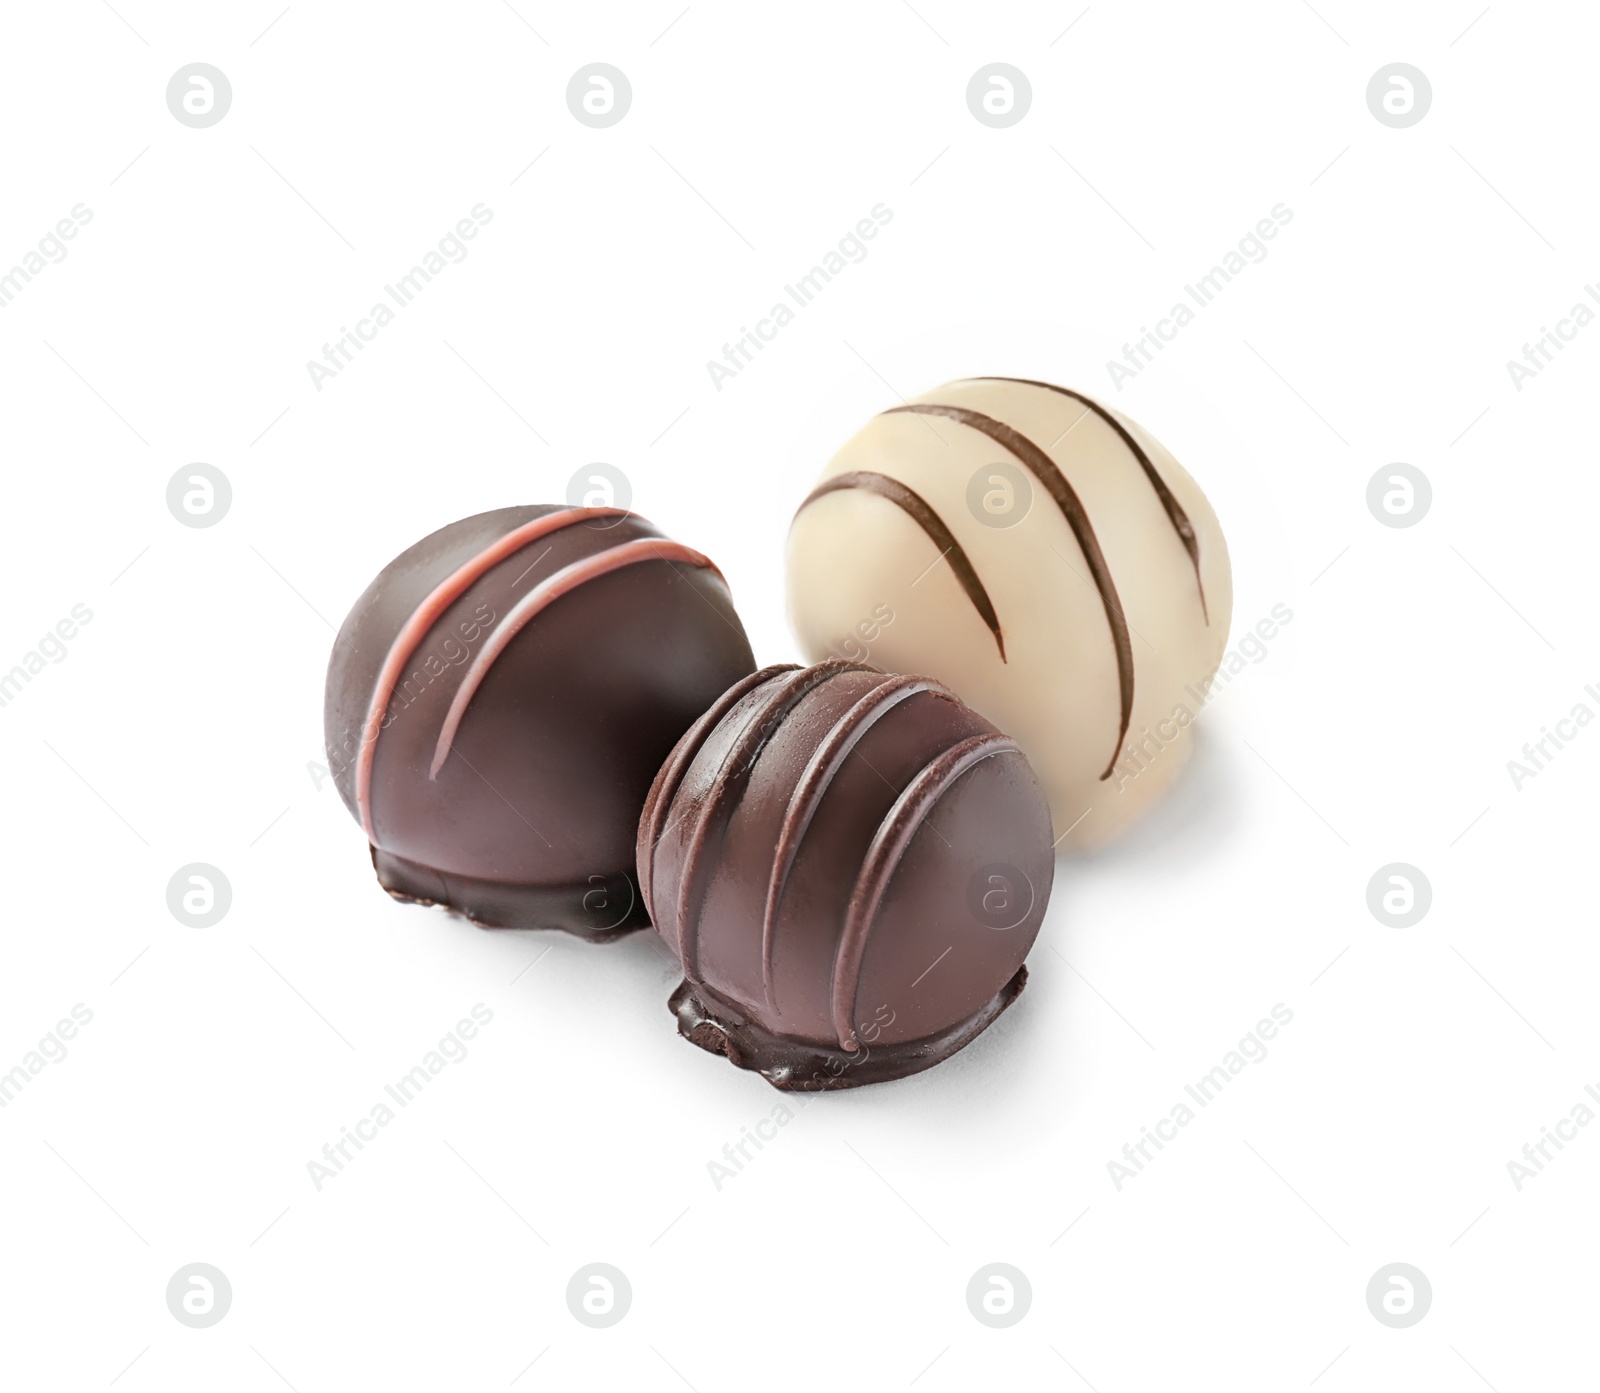 Photo of Three delicious chocolate candies on white background